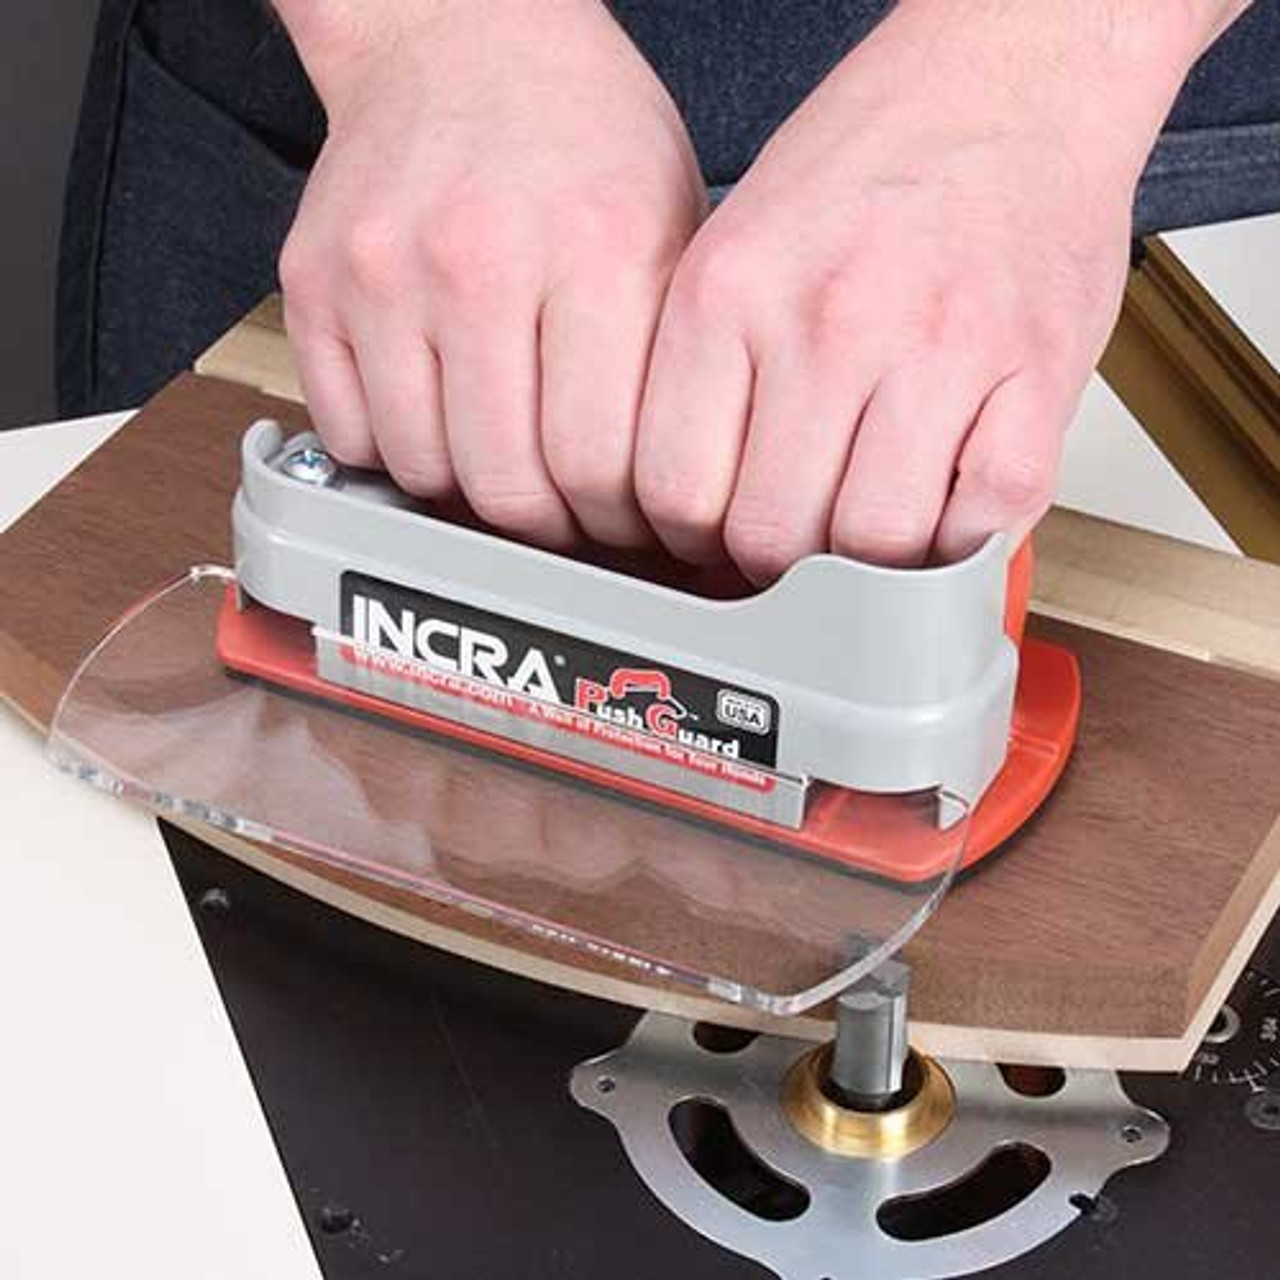 INCRA PushGuard Push Block / Hand Guard for Woodworking Table Saw Safety - 2-Pk